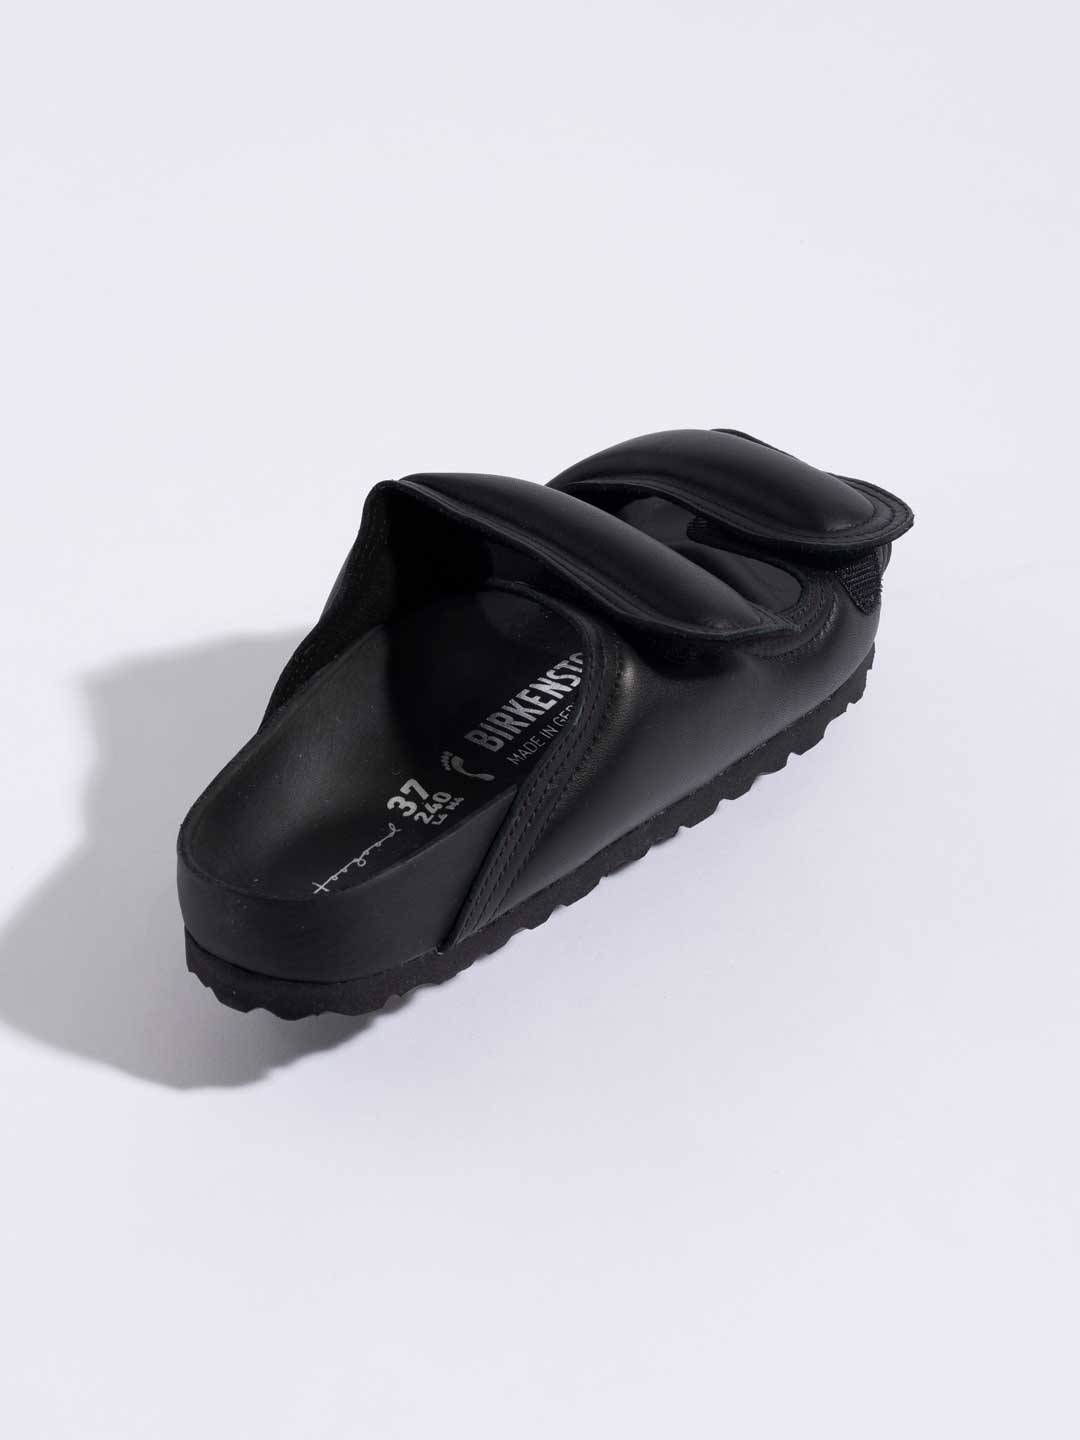 The Beach Comber Leather Sandals - Black